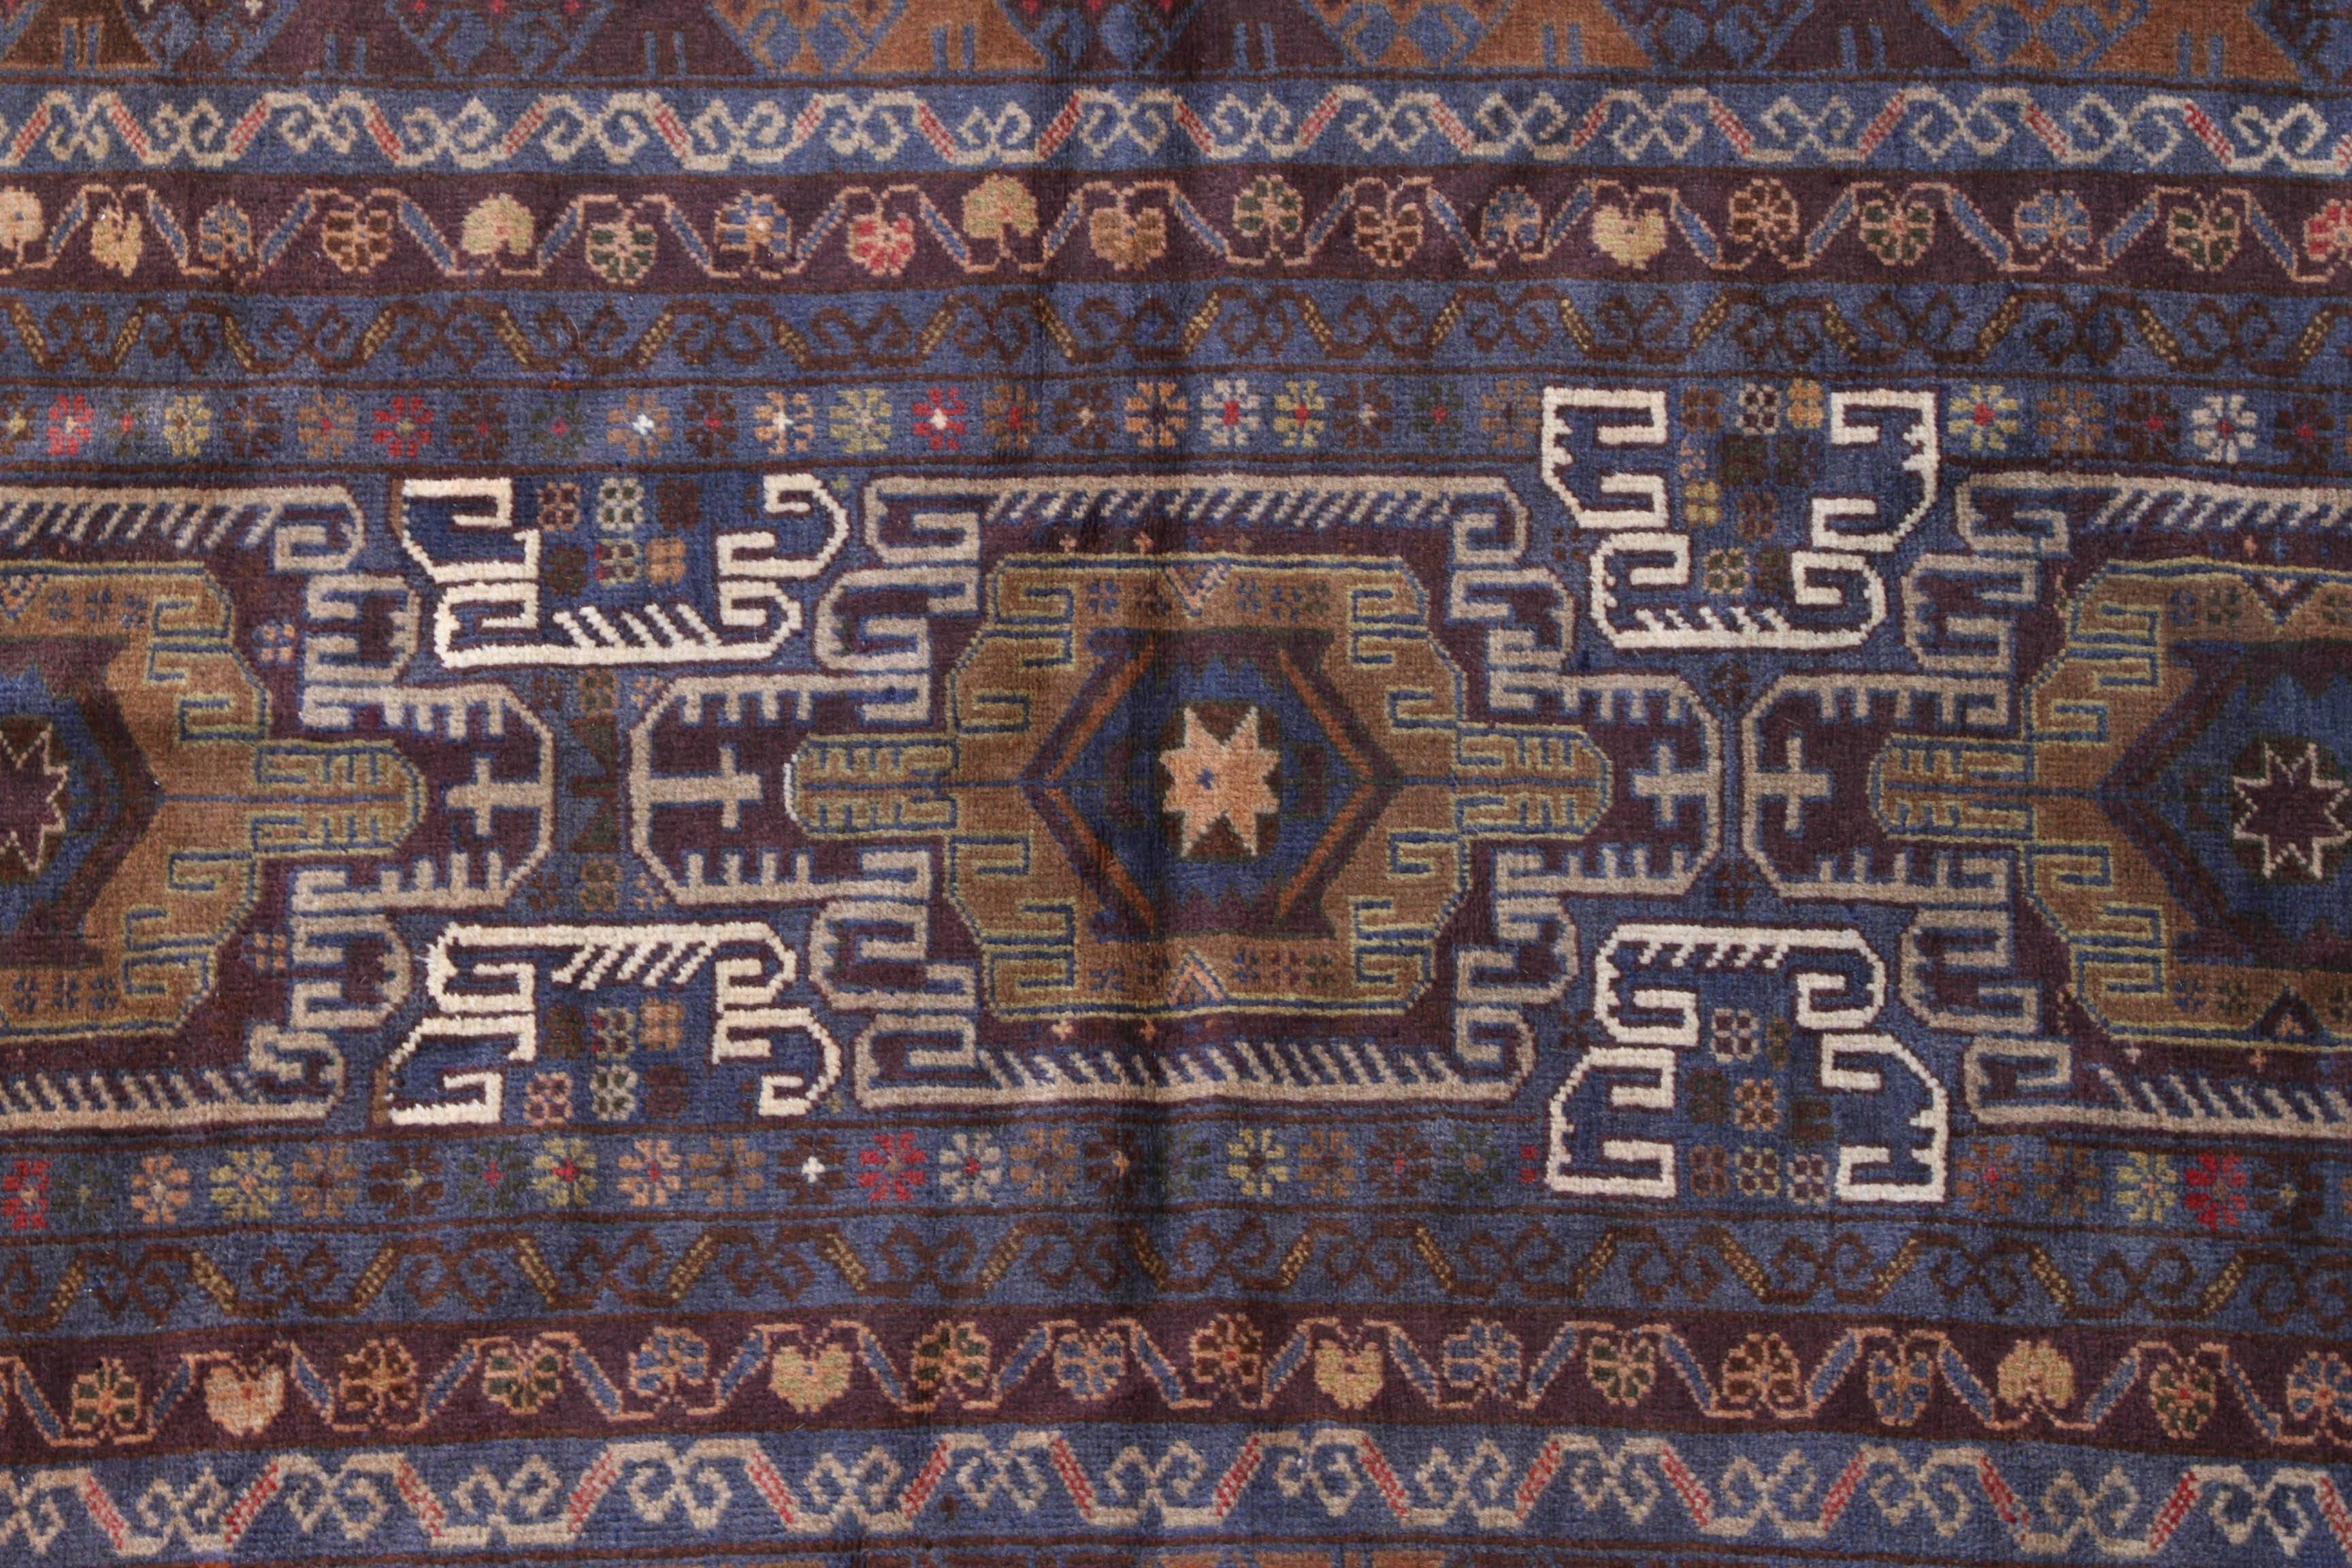 Antique Baluchi rug with three large geometric shapes running down the middle with white line details surrounding the. There are four rows of flower design running around the edge of the rug. Baluchi carpets are handmade carpets originally made by